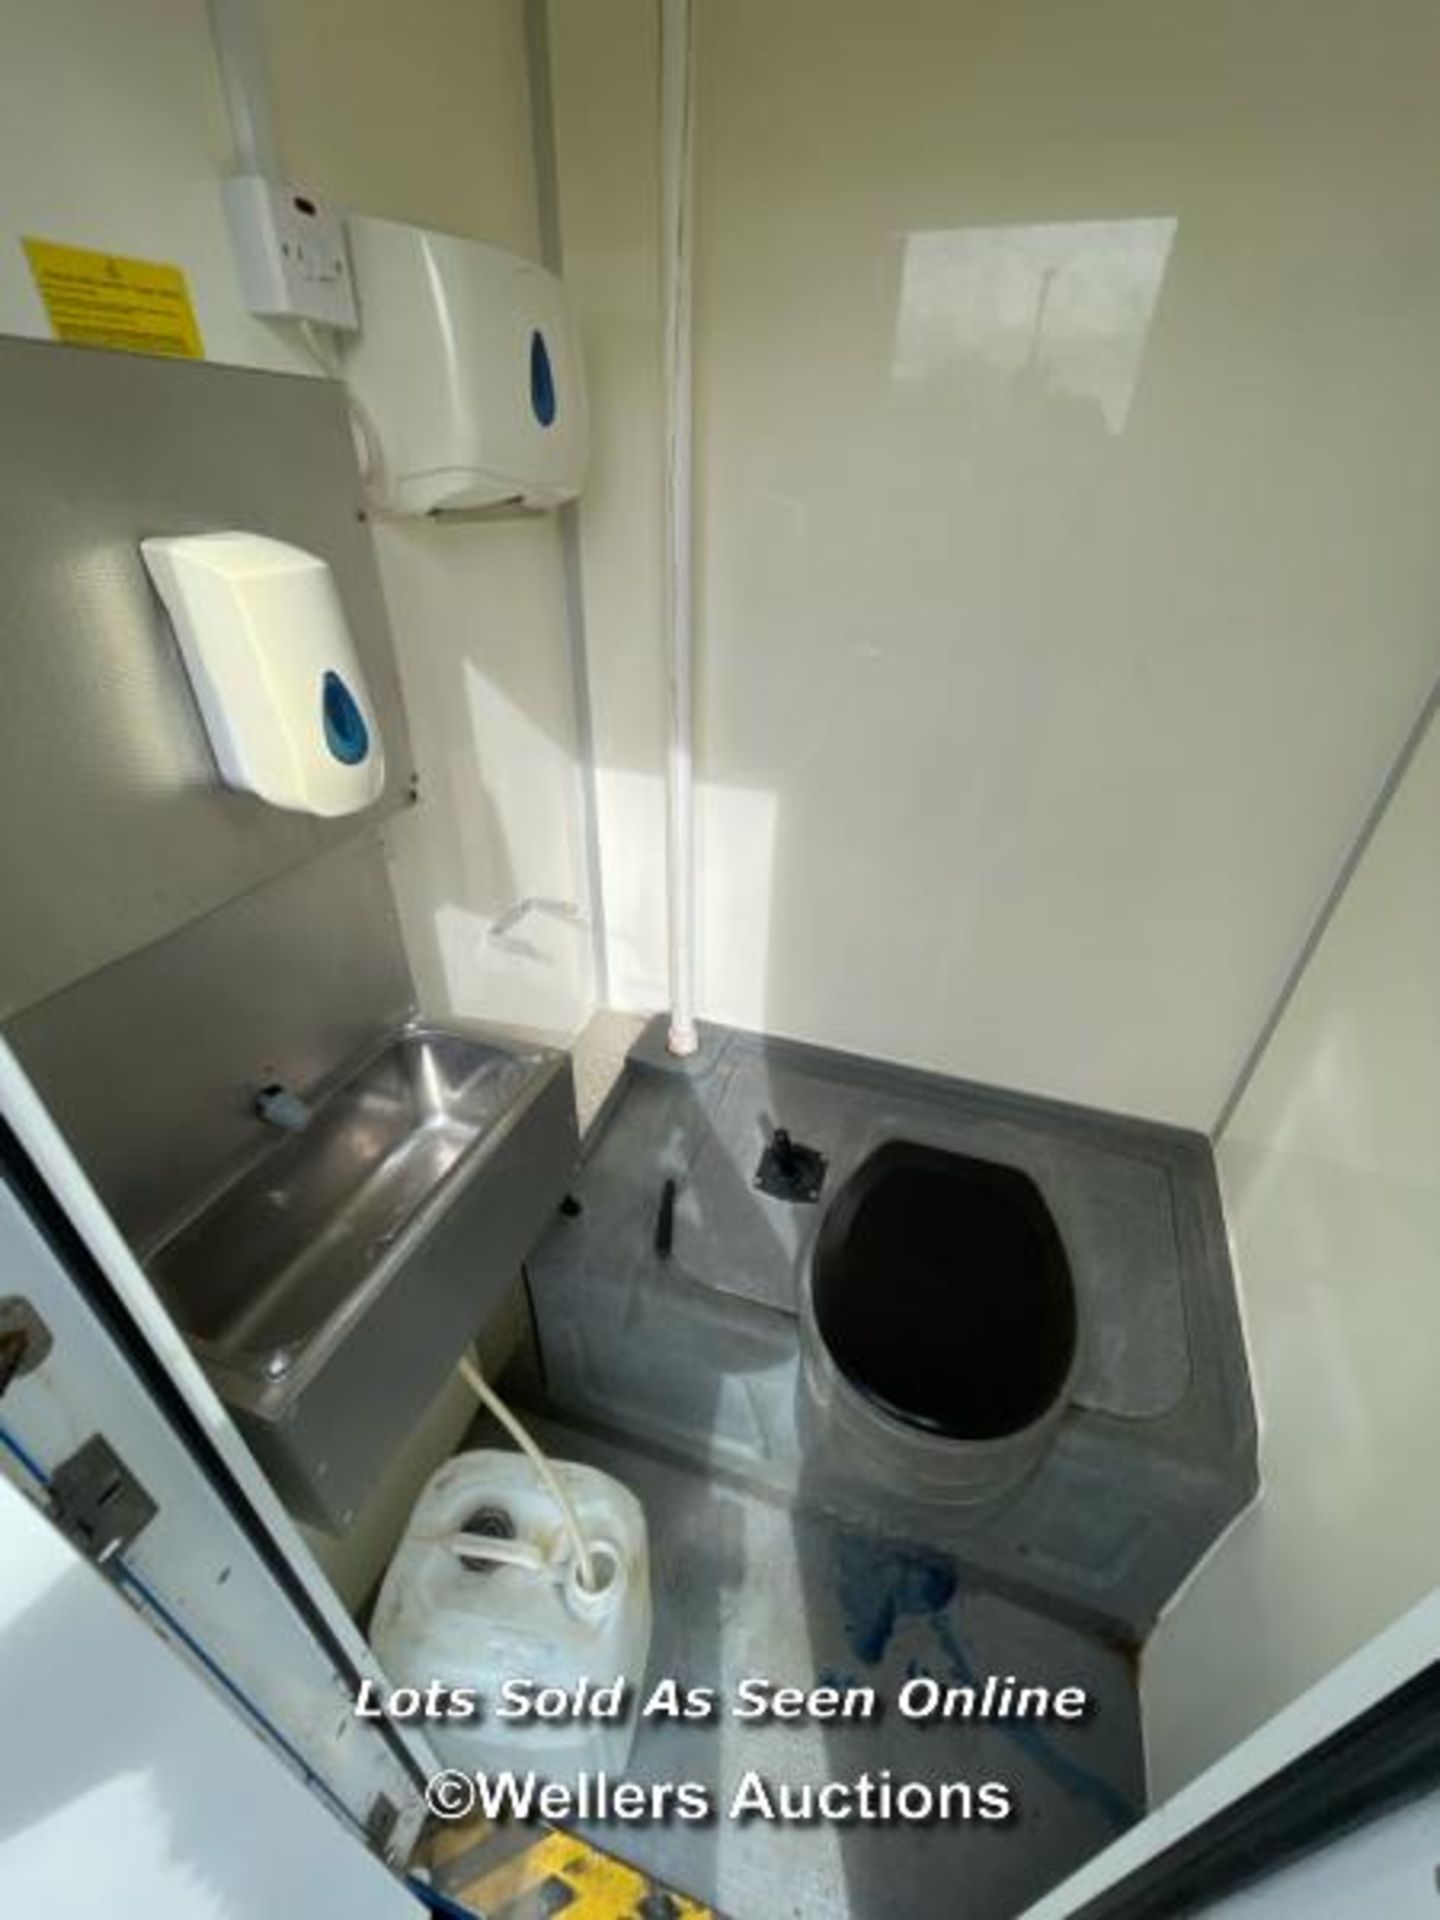 6 PERSON 12 X 7.5FT AJC EASY CABIN TOWABLE WELFARE UNIT, INCLUDES WASH BASIN, KETTLE, MICROWAVE, - Image 12 of 18